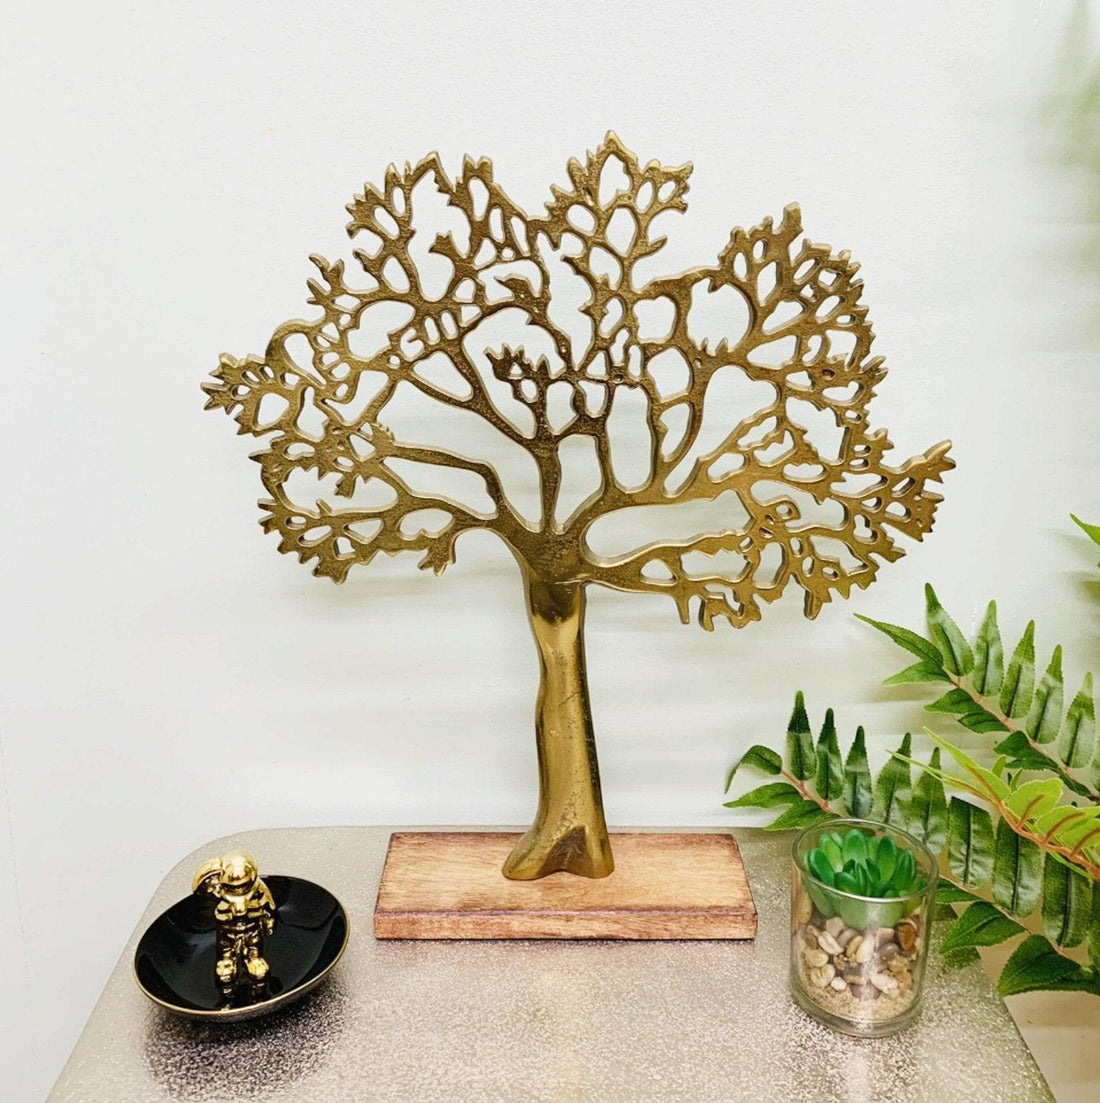 Antique Gold Tree On Wooden Base Large - £49.99 - Tree Of Life 